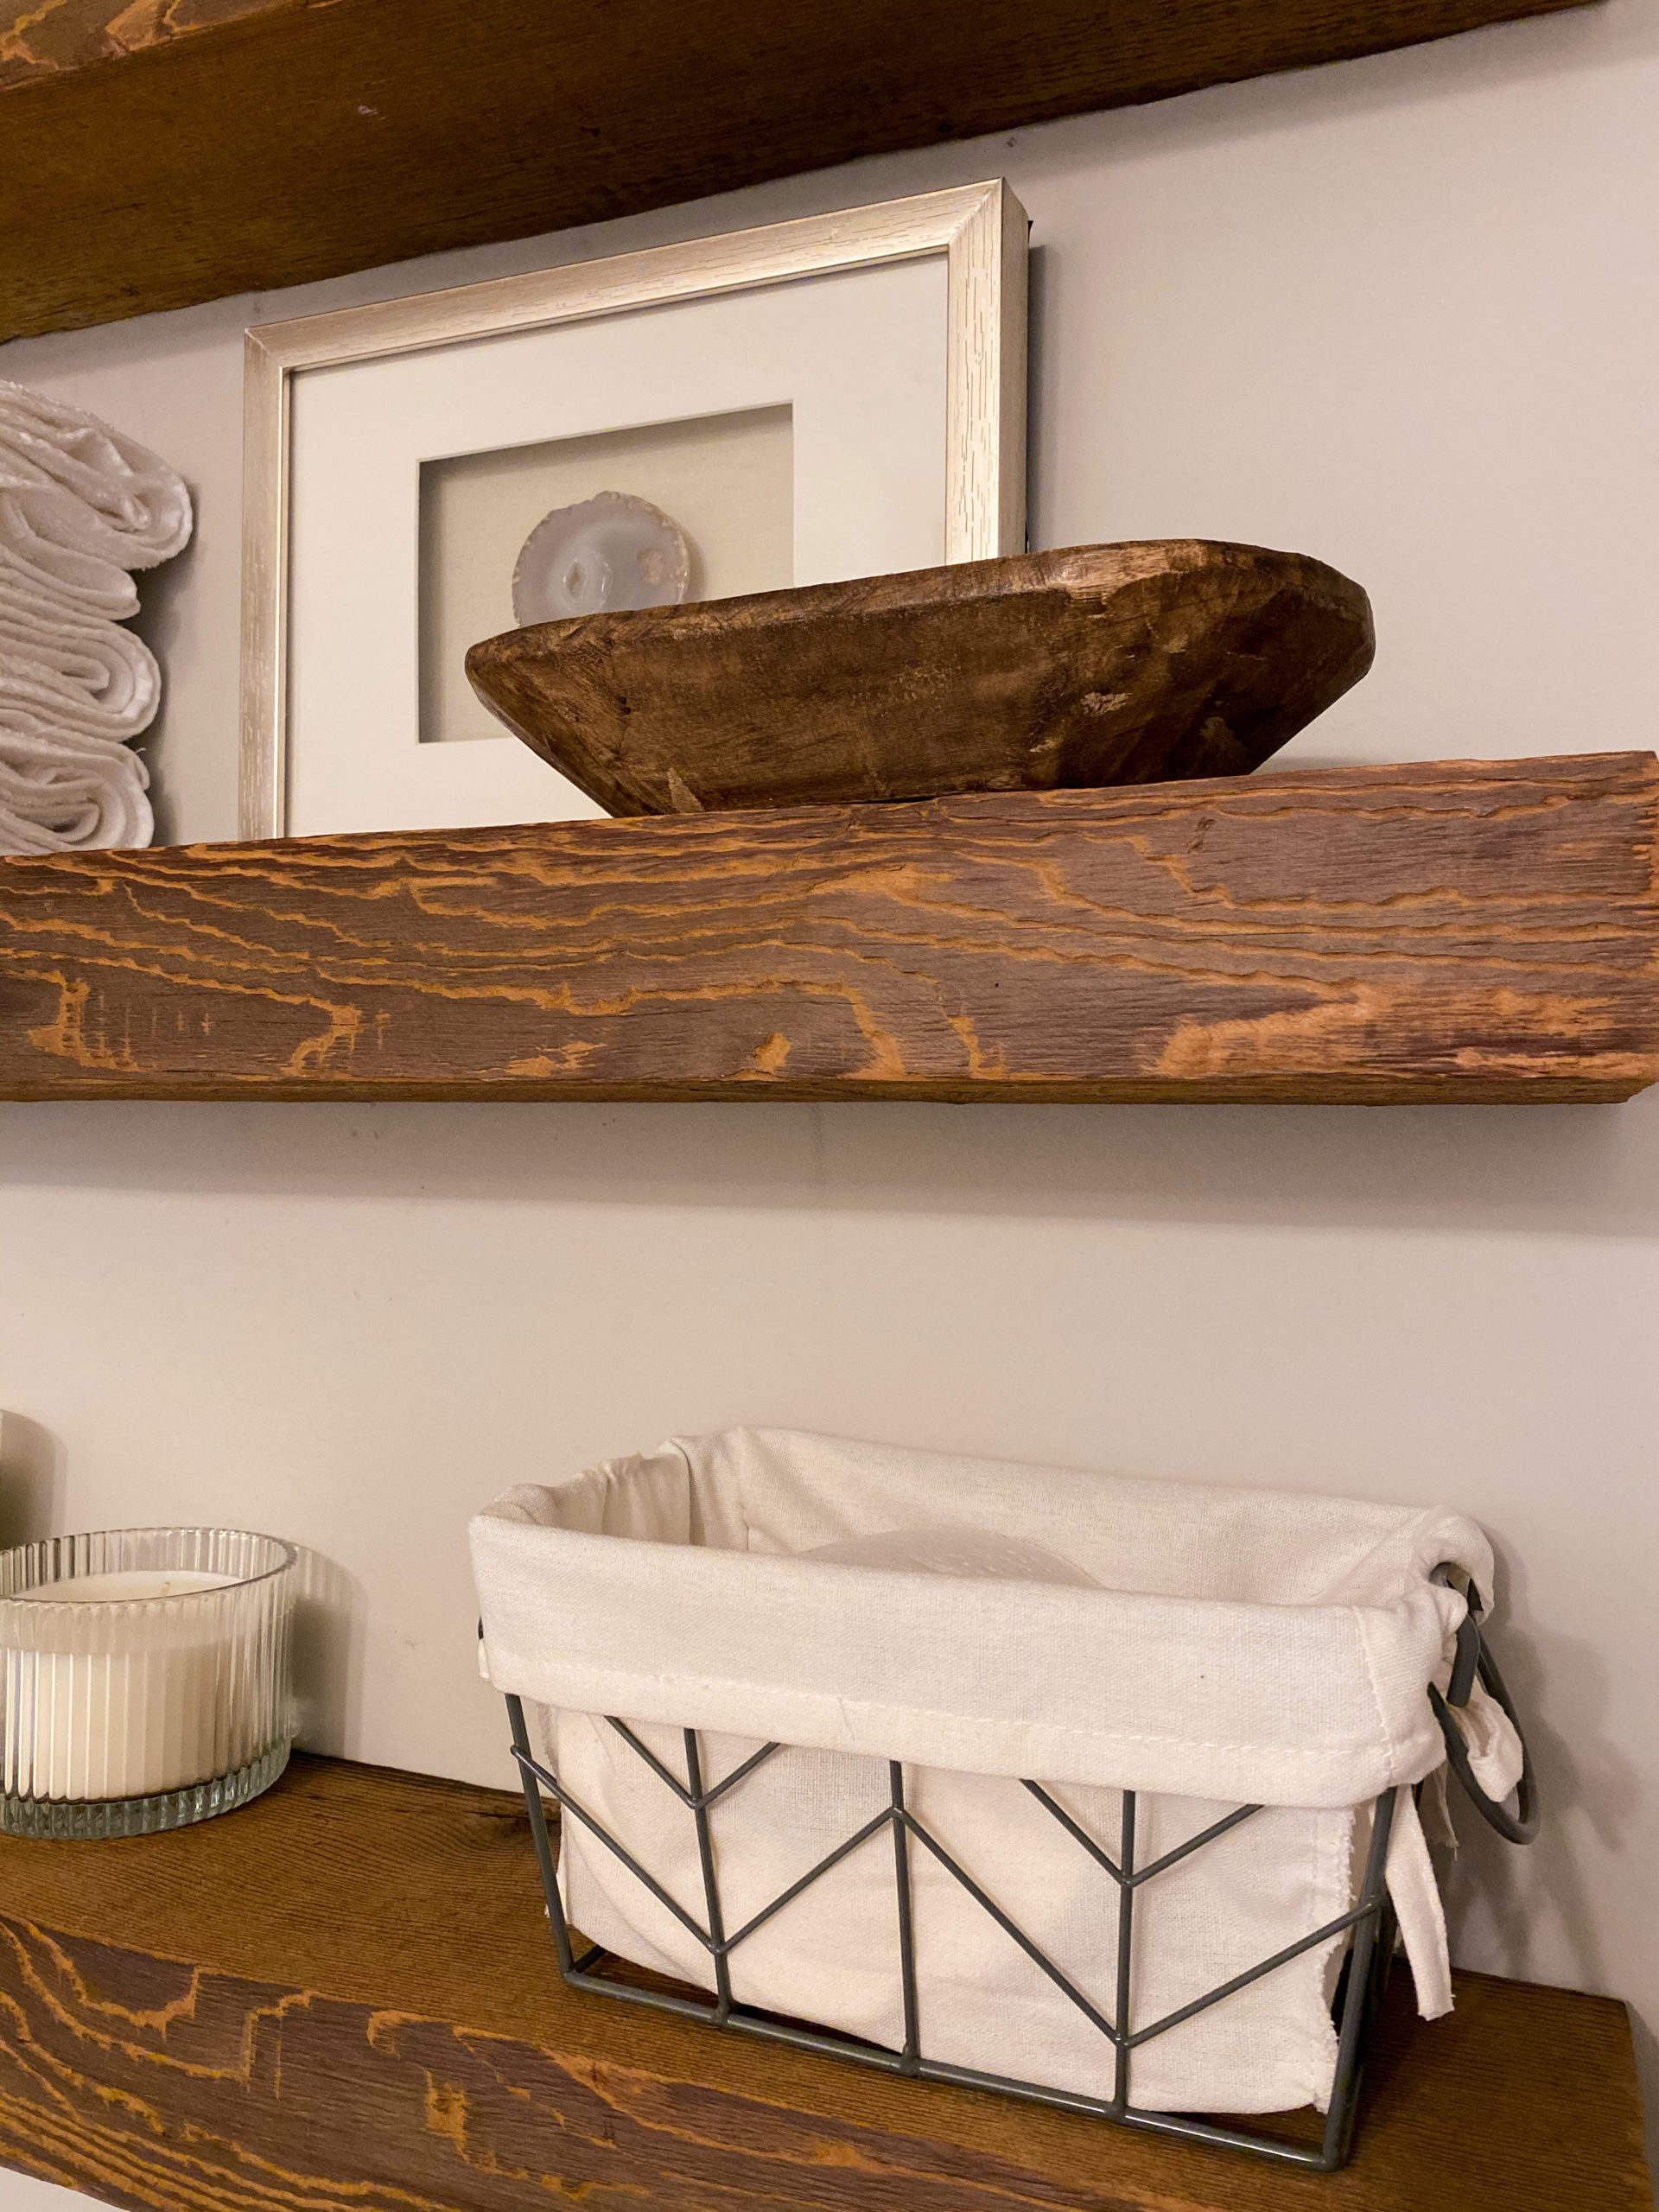 How to Decorate Floating Shelves in a Bathroom